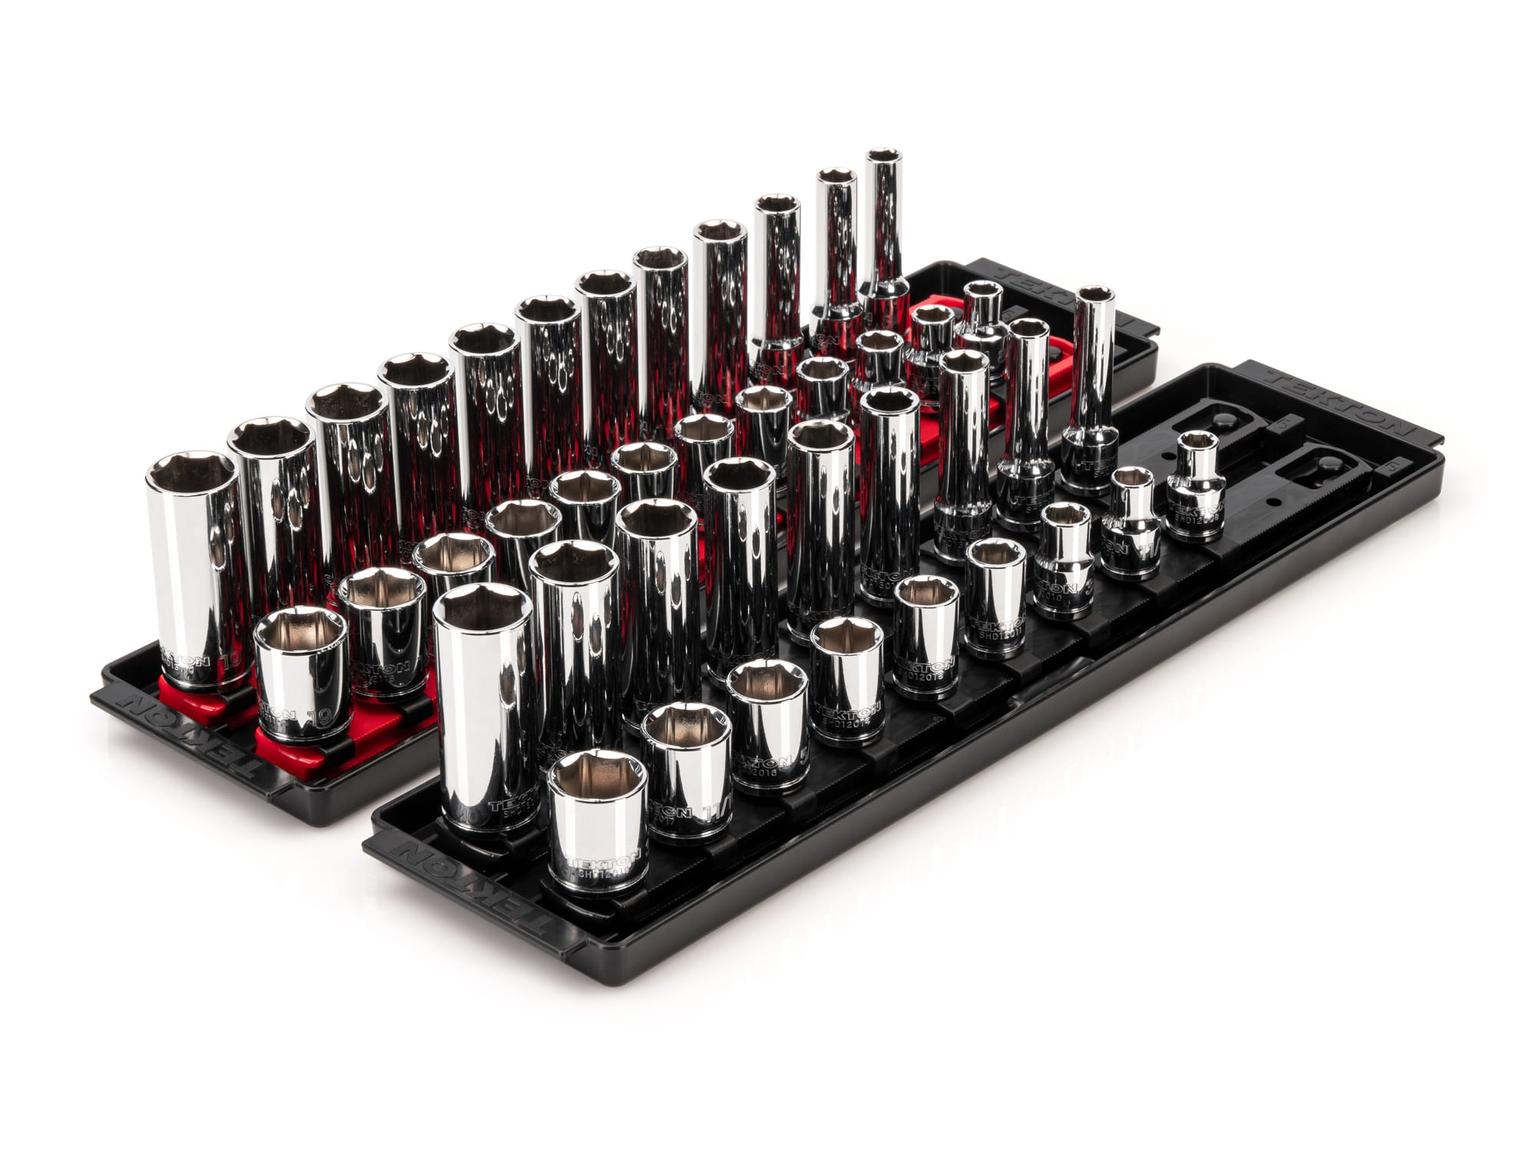 TEKTON SHD91218-T 3/8 Inch Drive 6-Point Socket Set with Rails, 42-Piece (5/16-3/4 in., 8-19 mm)